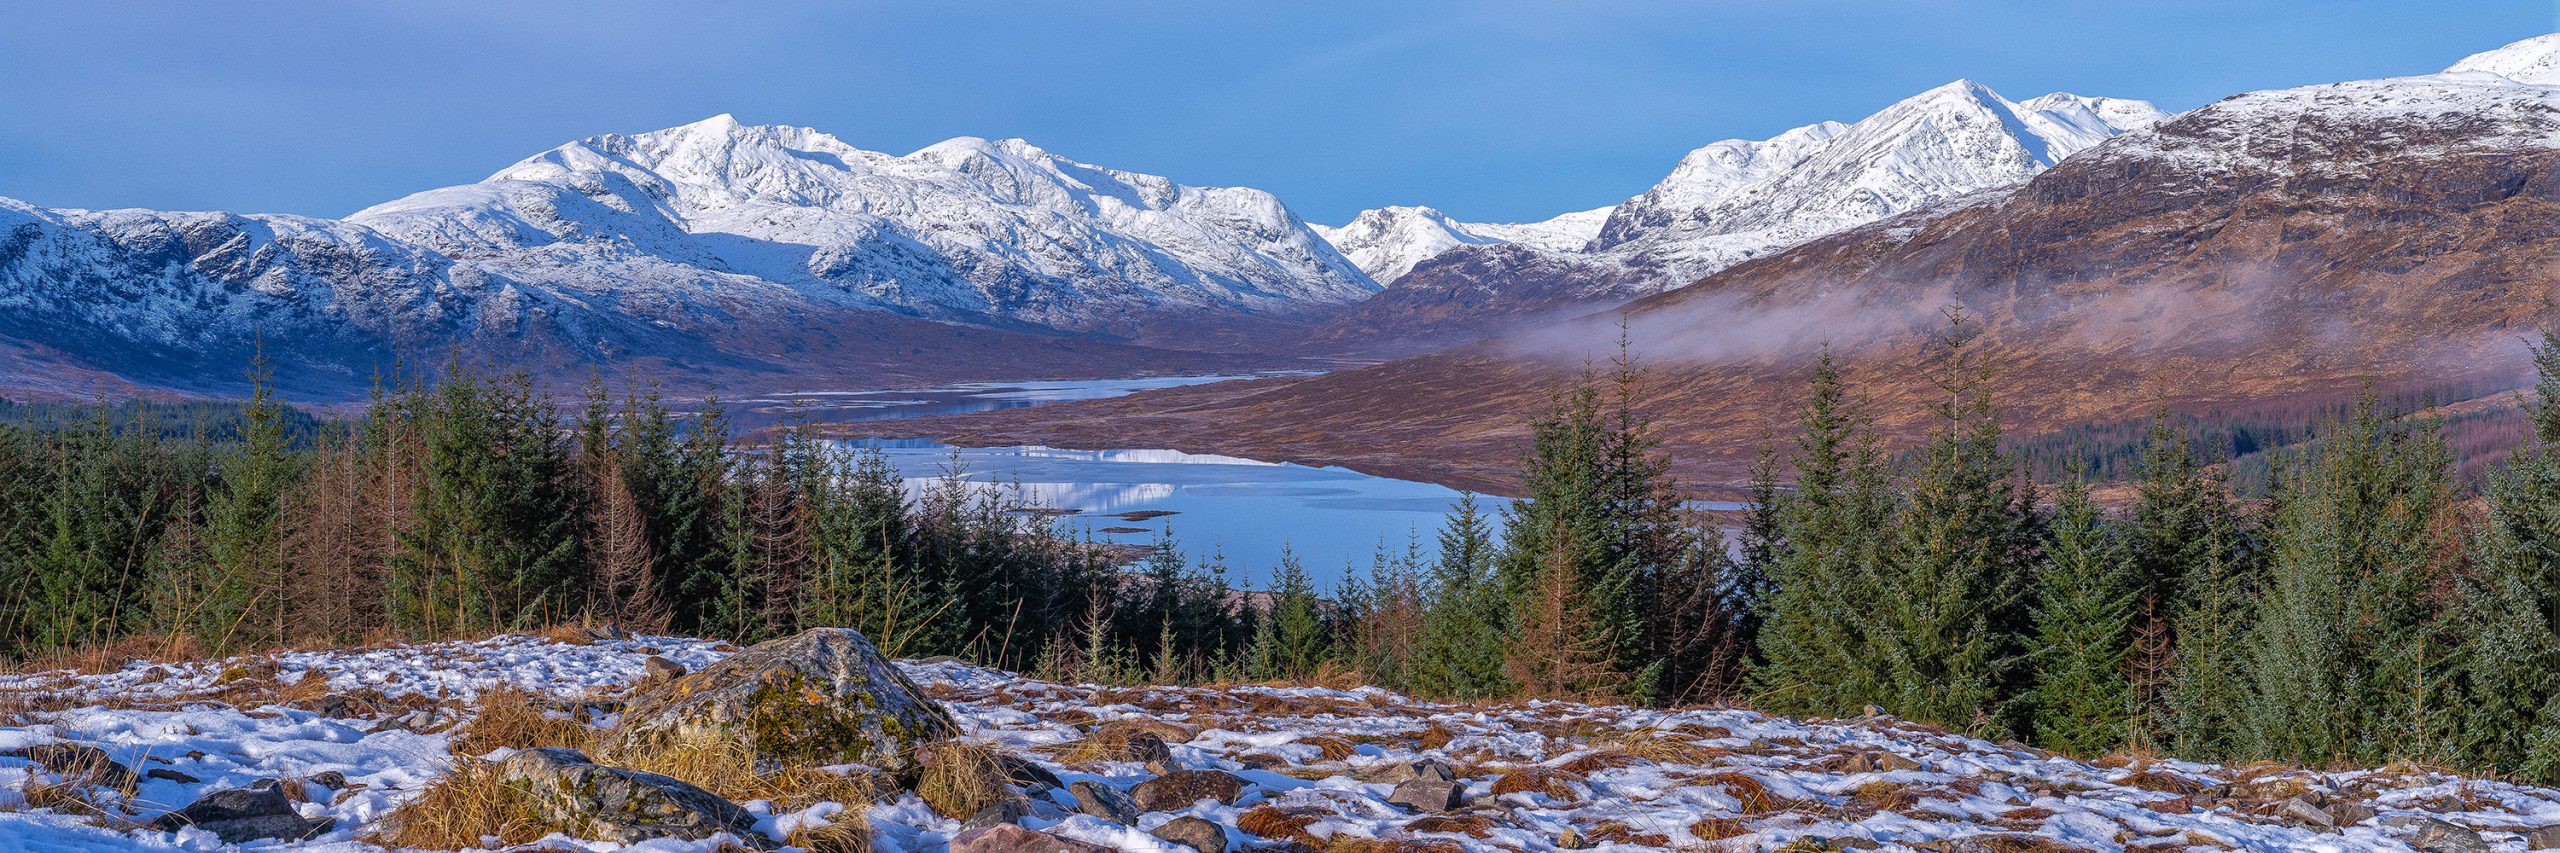 Loch Loyne and the Mountains of Knoydart and Glen Shiel by Ian Evans - Mountain Images